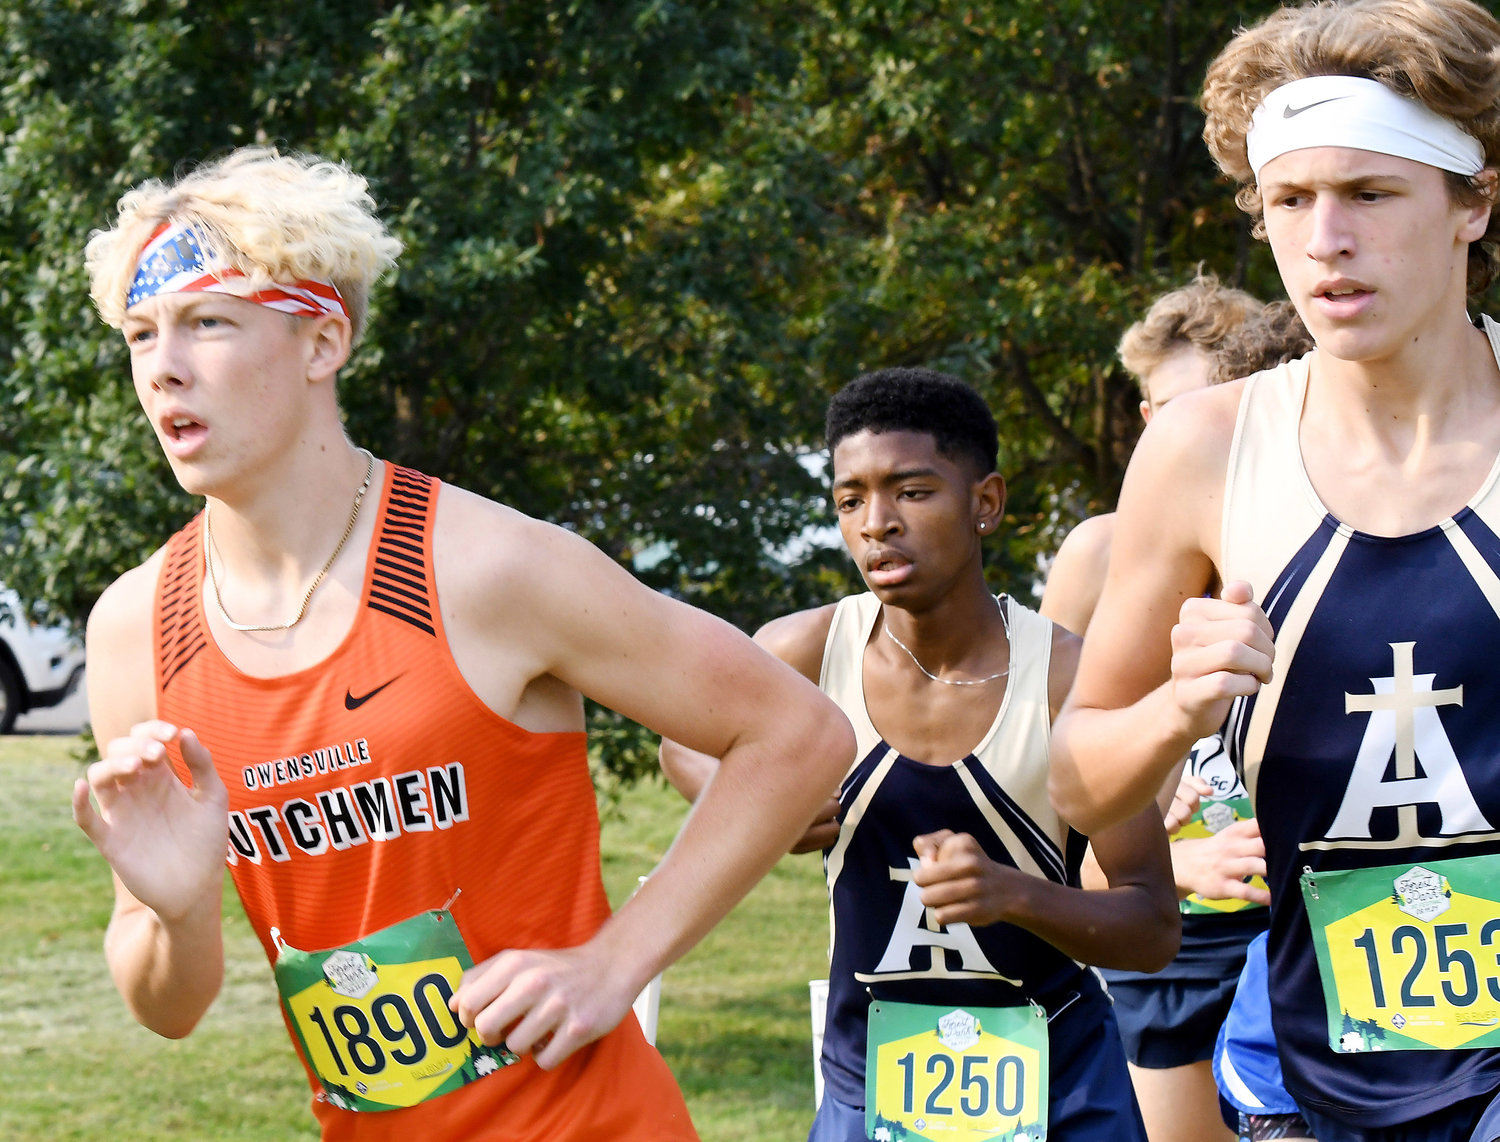 Jacob Breedlove (far left) leads a pack of runners during the varsity boys race at Forest Park in St. Louis back on Saturday, Sept. 11.